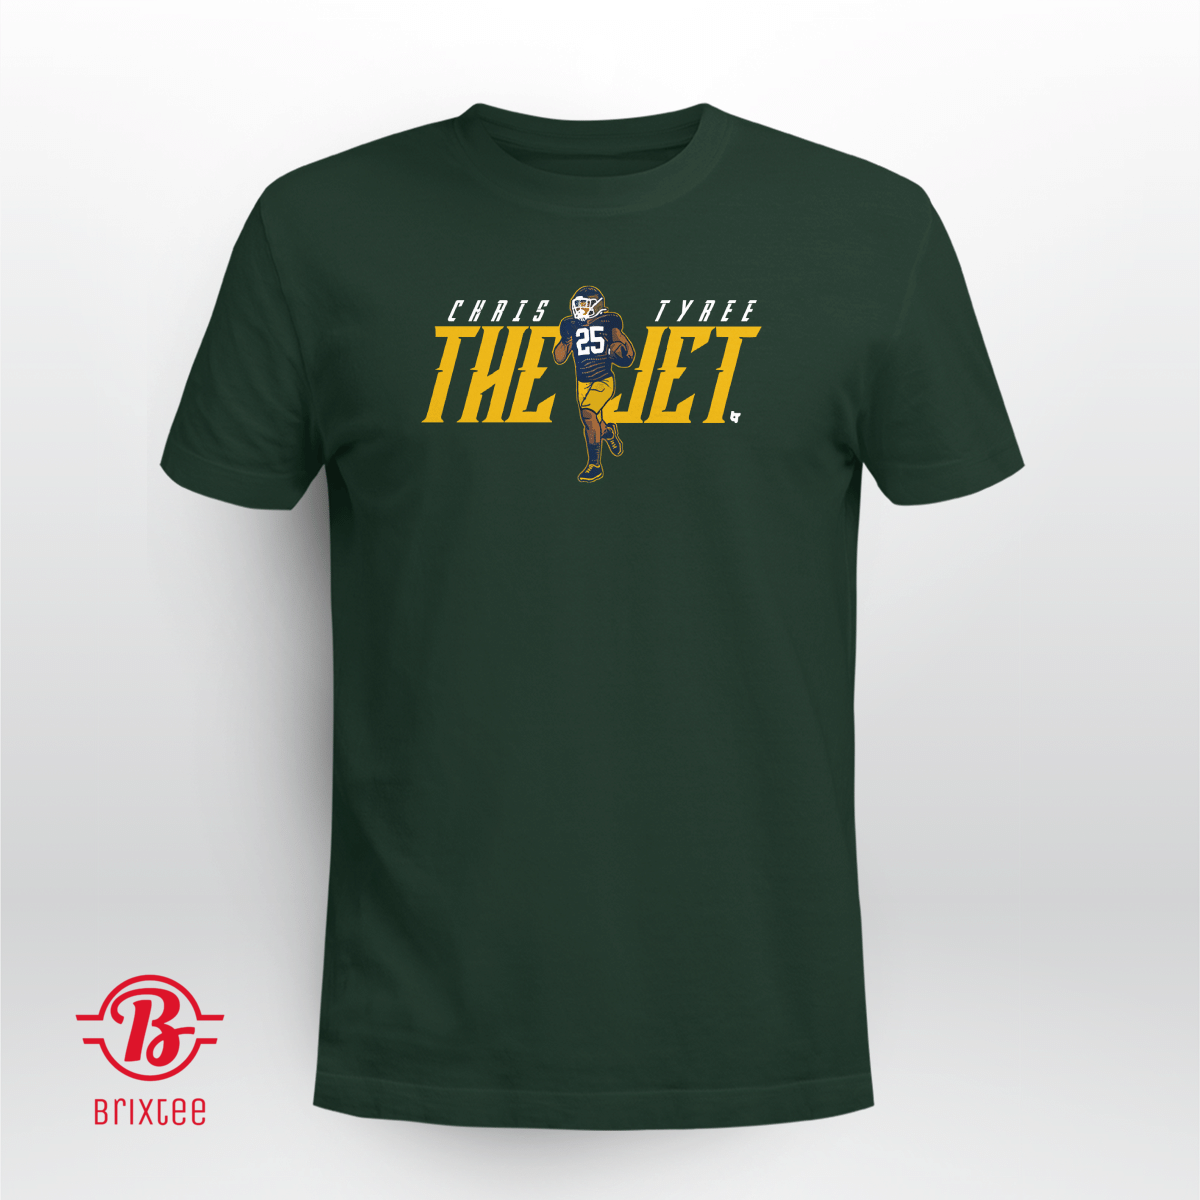 Chris Tyree The Jet | Notre Dame Football